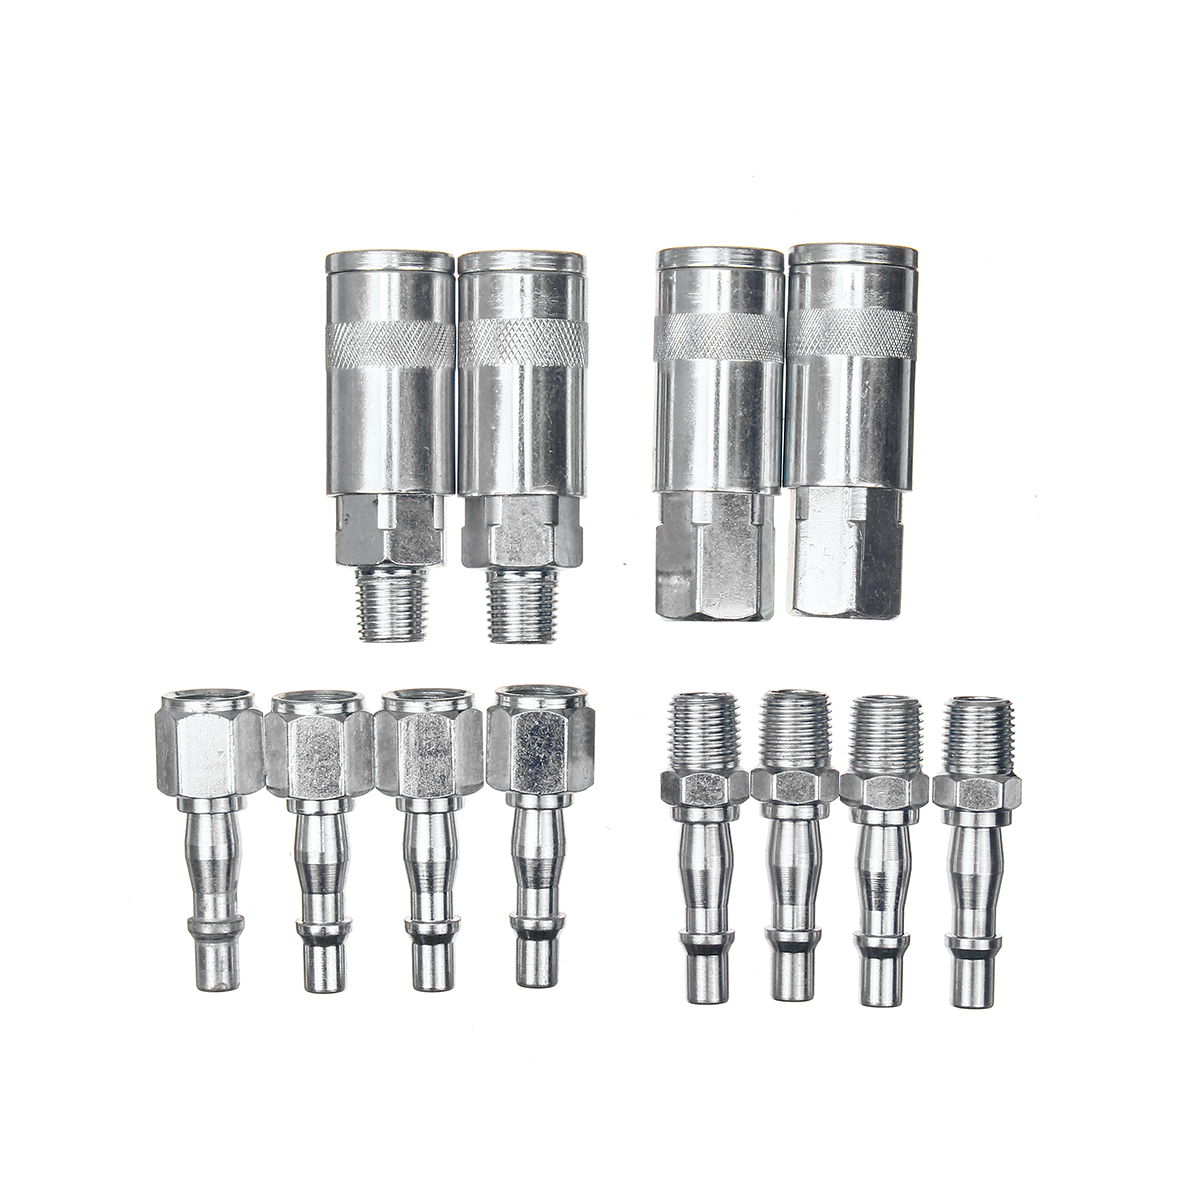 

12pcs 1/4 BSP Air Line Hose Pipes Fittings Couplings Quick Release Connector Male Female Connector